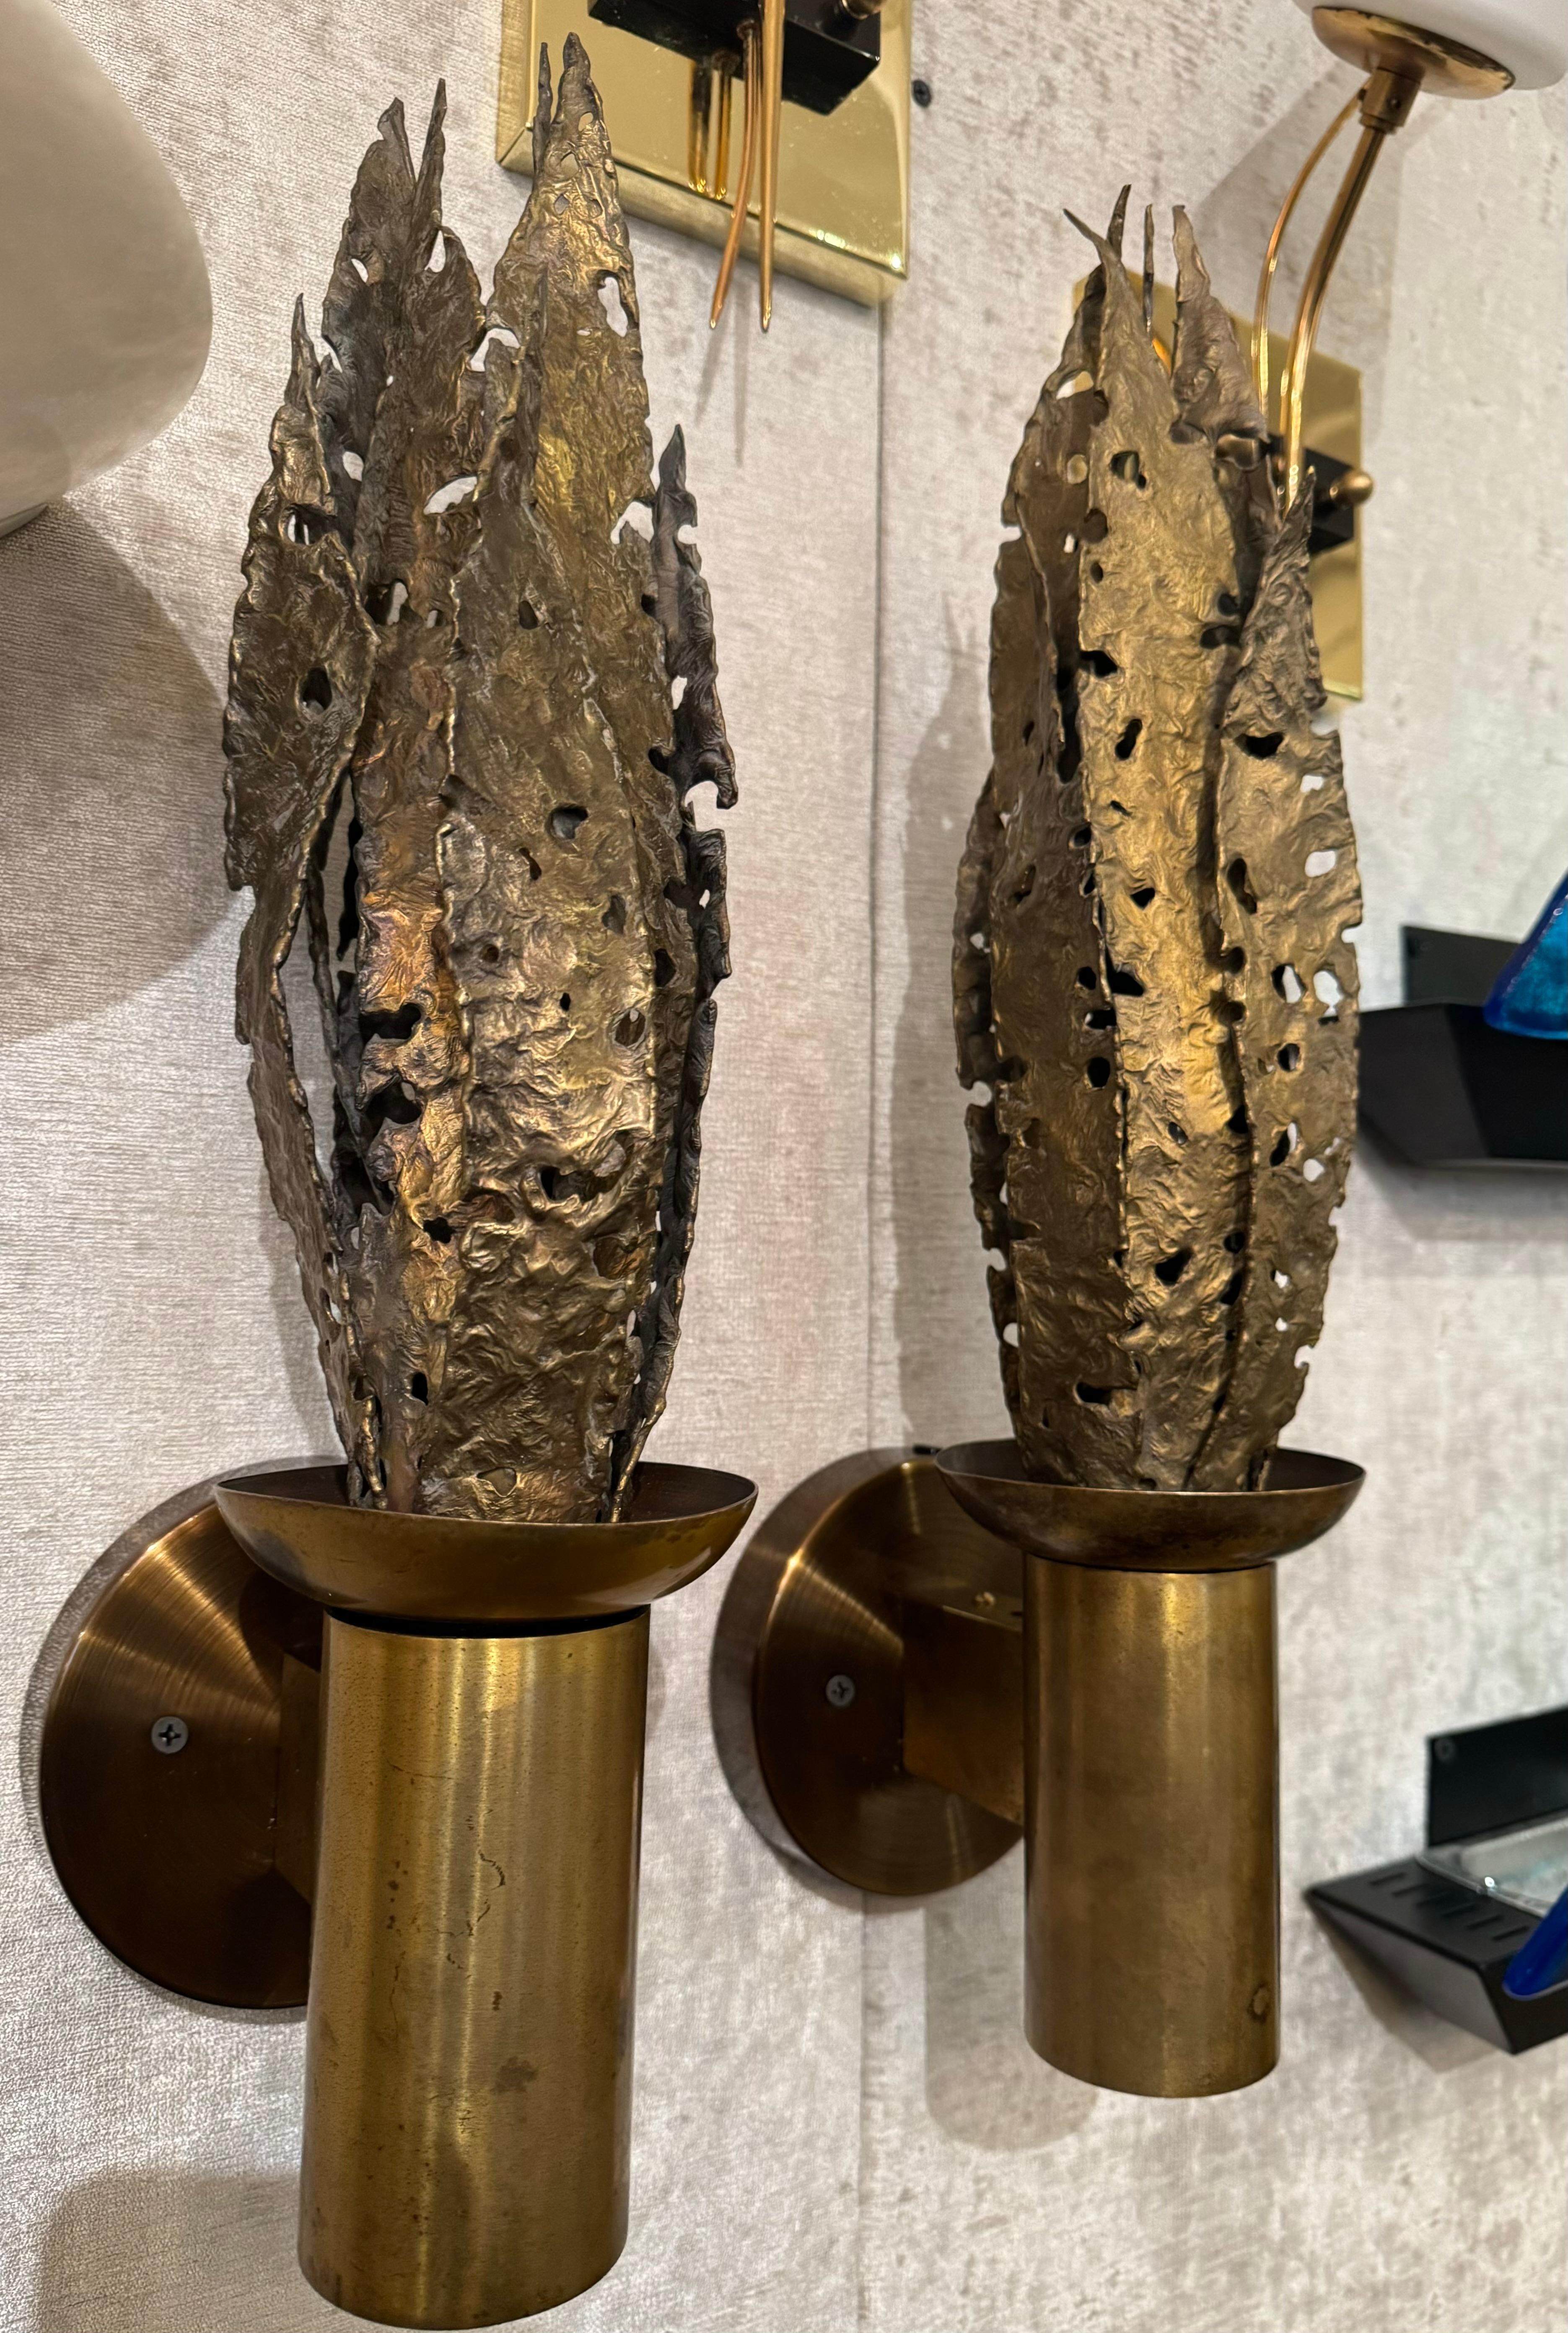 Pair of large 1970s hand crafted bronze and brass brutal wall lamps by Belgian artist, Paul Moerenhout Two candelabra sockets , one upward and downward. Signed.



Paul Moerenhout is a famous Belgian sculptor whose workshop was in Brussels between